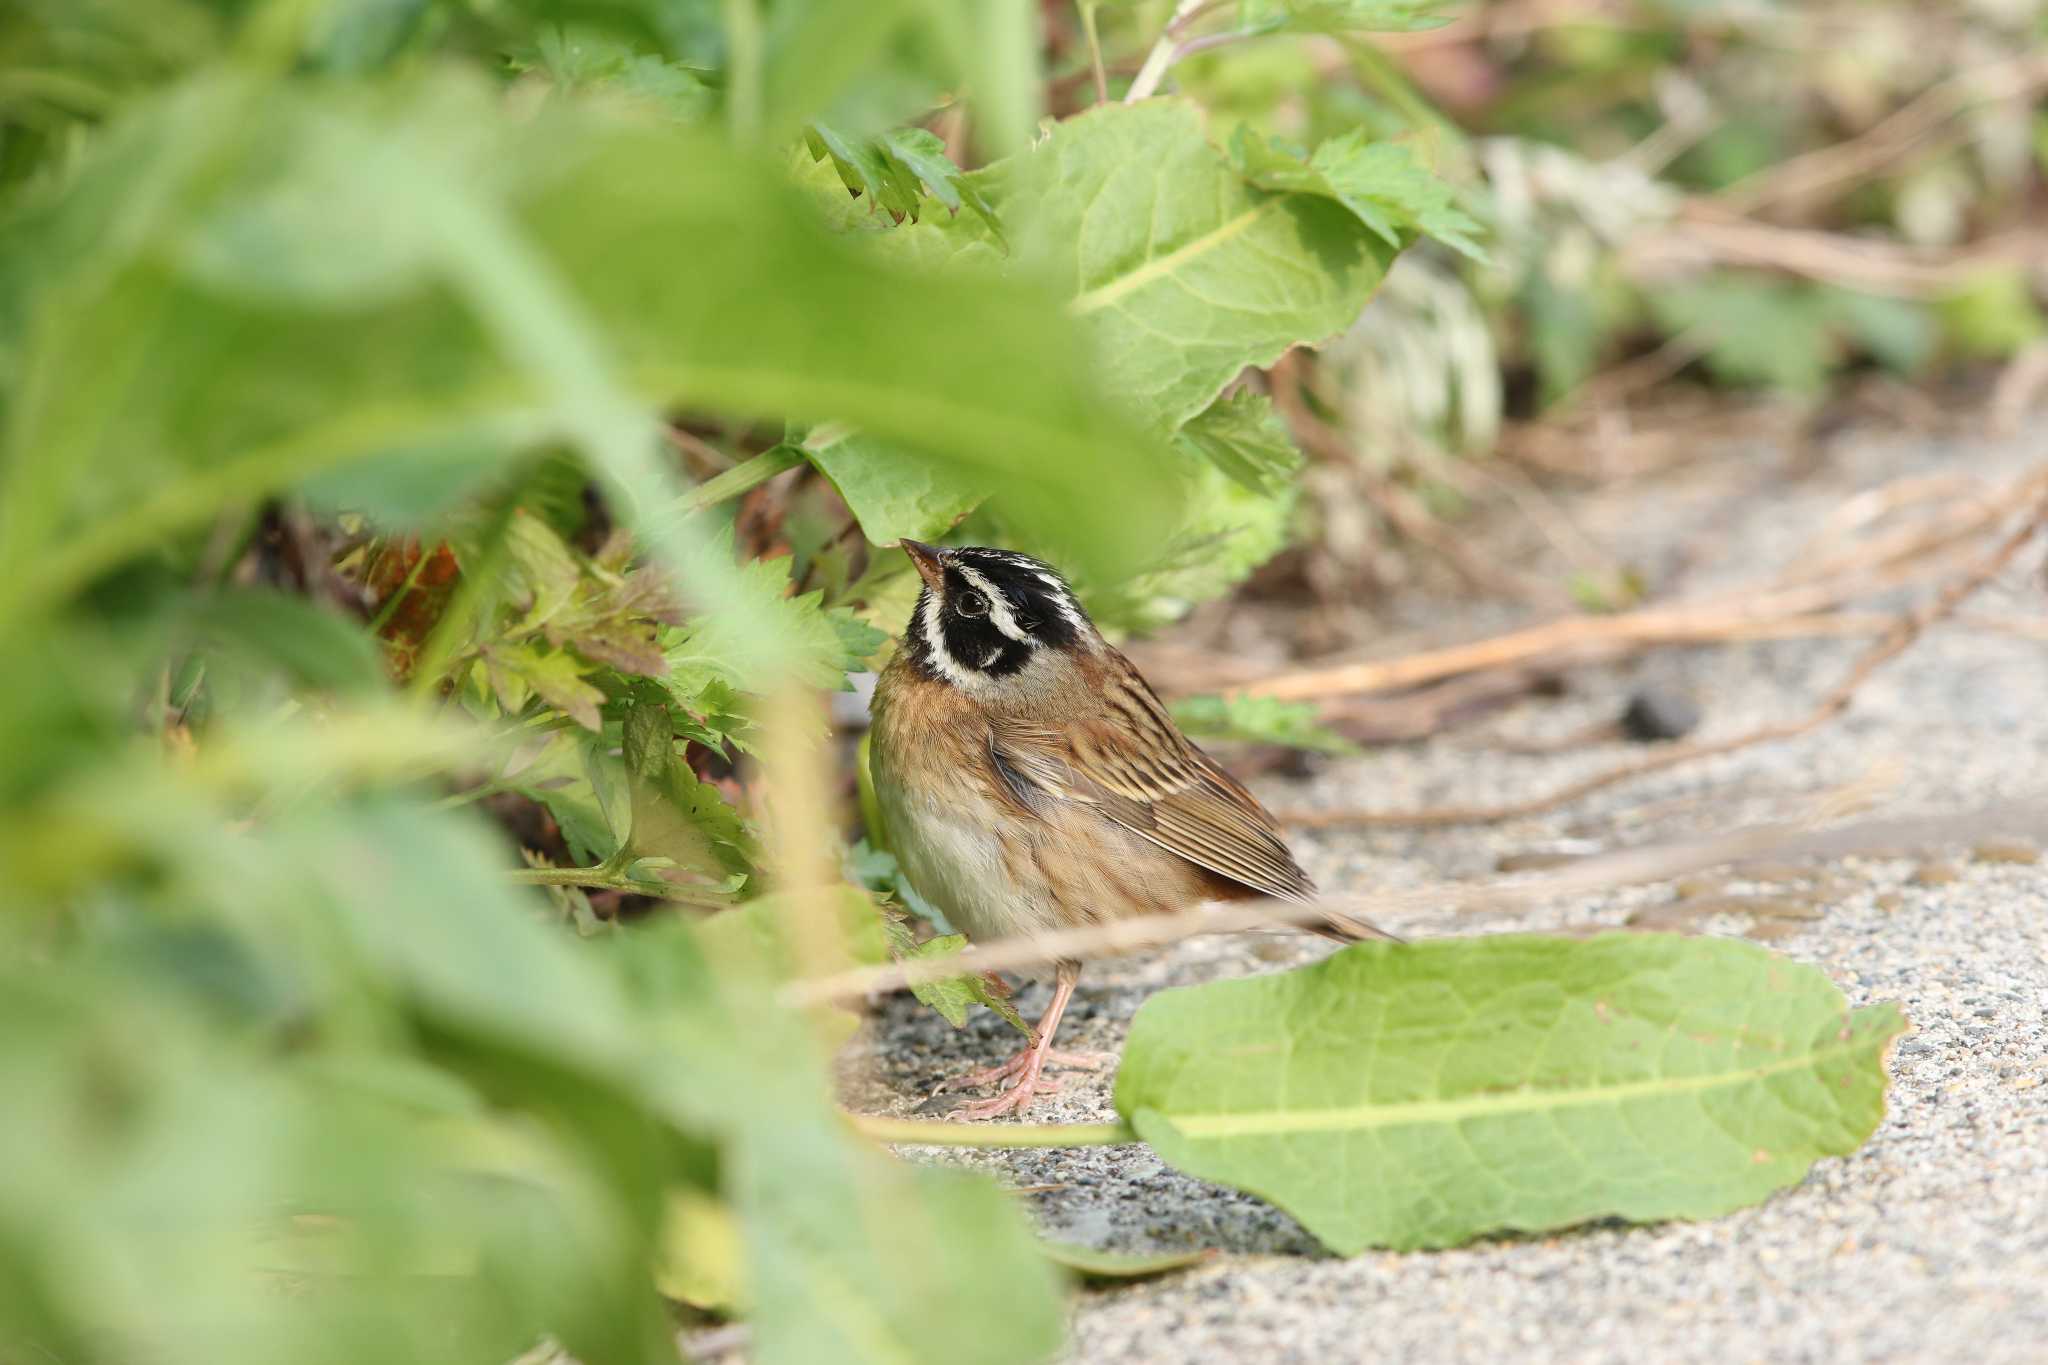 Photo of Tristram's Bunting at Hegura Island by Trio